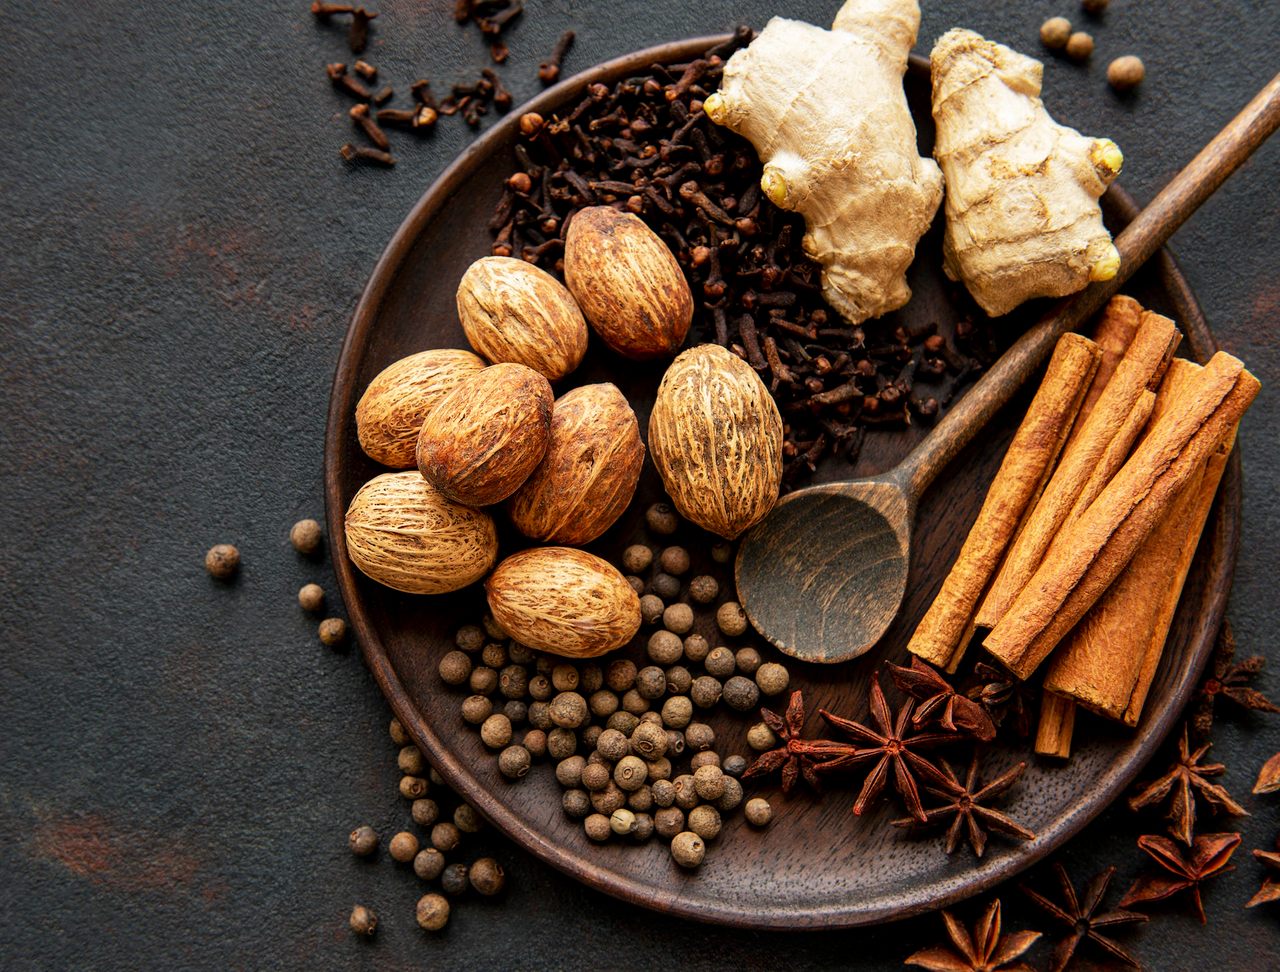 Ginger, cinnamon, and nutmeg are so-called warm spices and the quintessential flavors of winter holidays. 